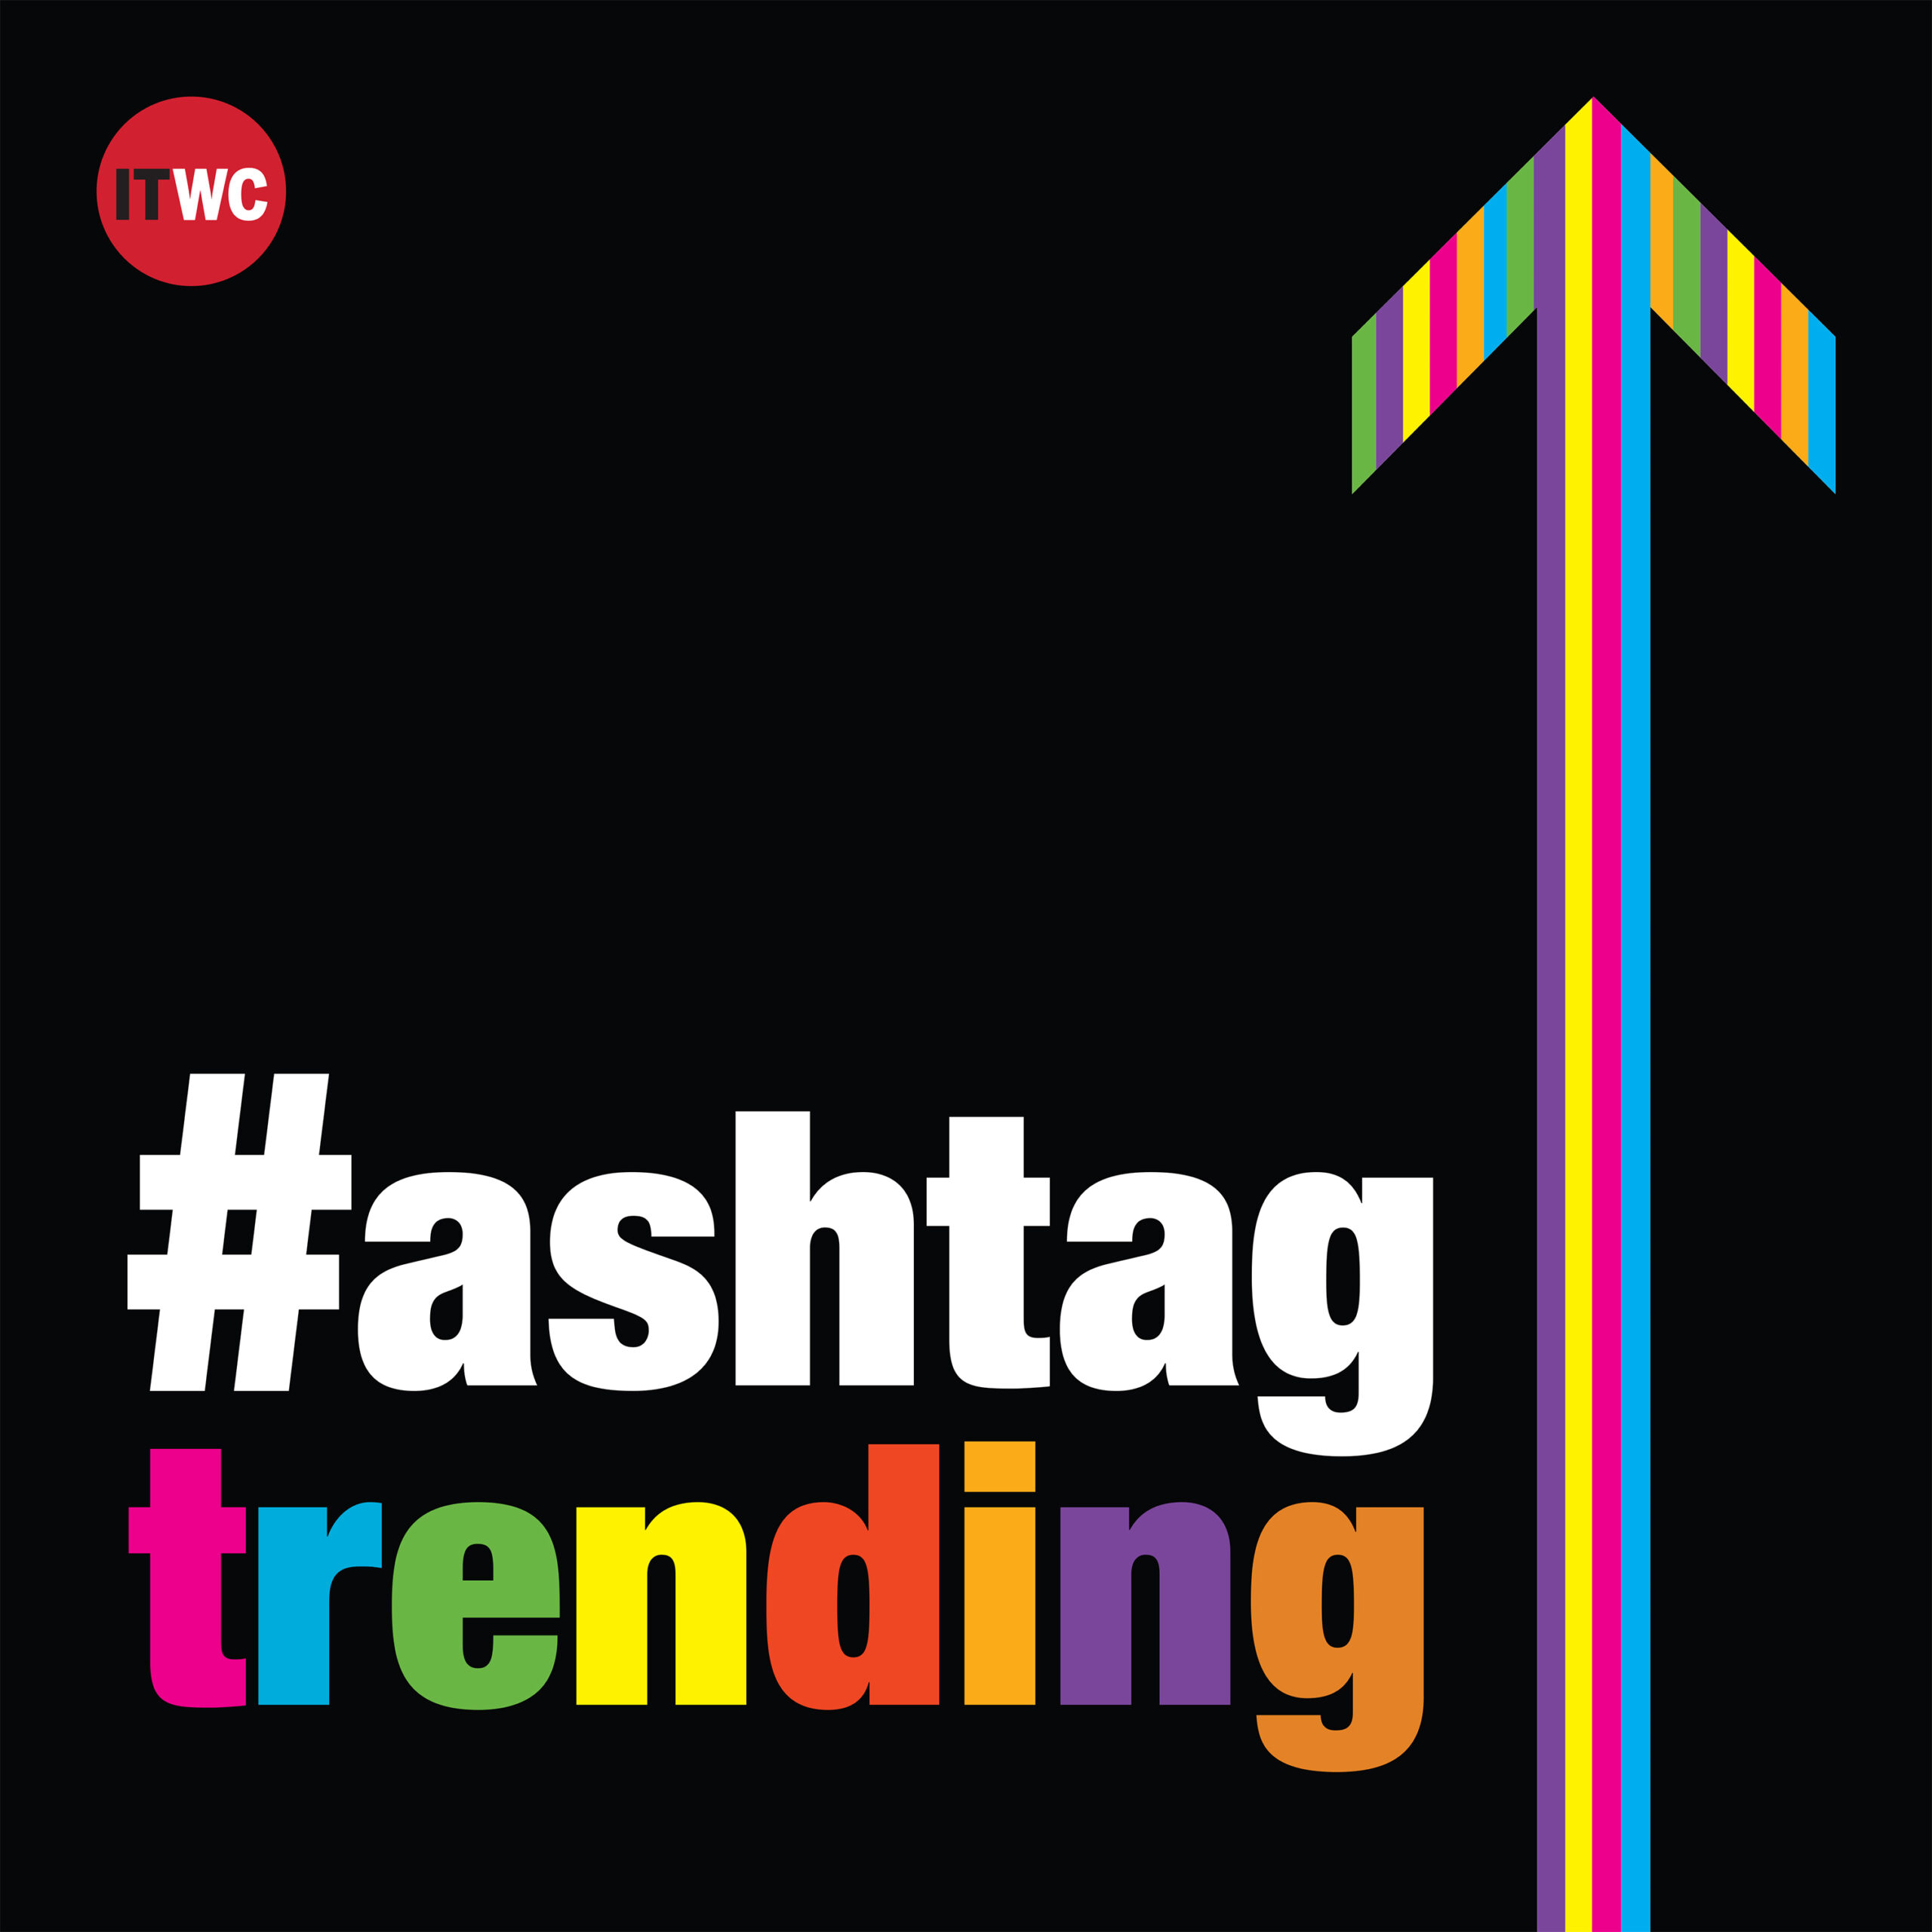 Is gaming redefining business, careers, education and the future? Hashtag Trending, the Weekend Edition